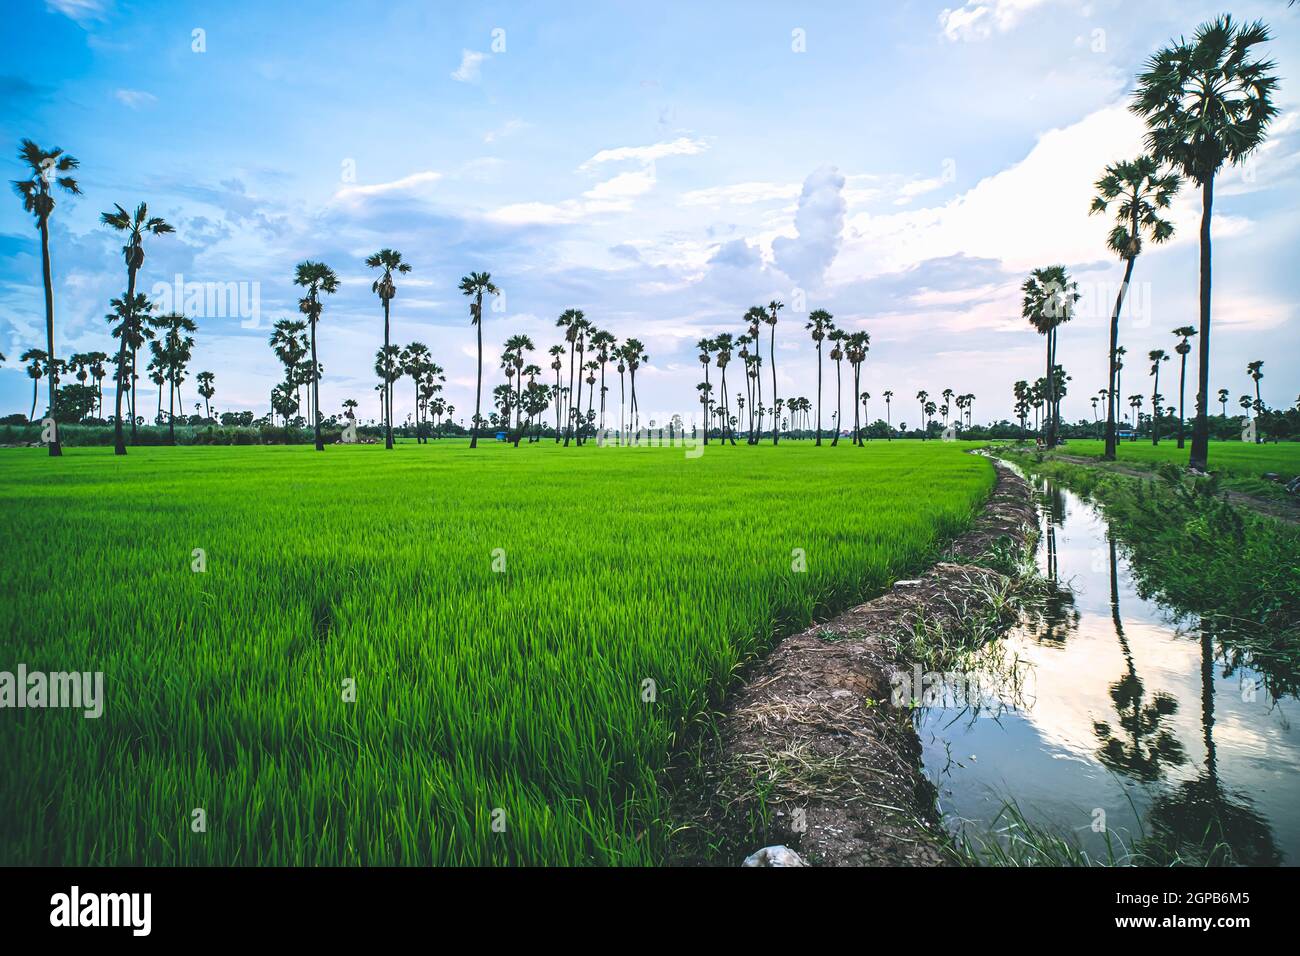 Landscape under scenic colorful sky at sunset over rice field and sugar palm trees. Rice fields and palm trees at sunset in Pathum Thani, Thailand Stock Photo